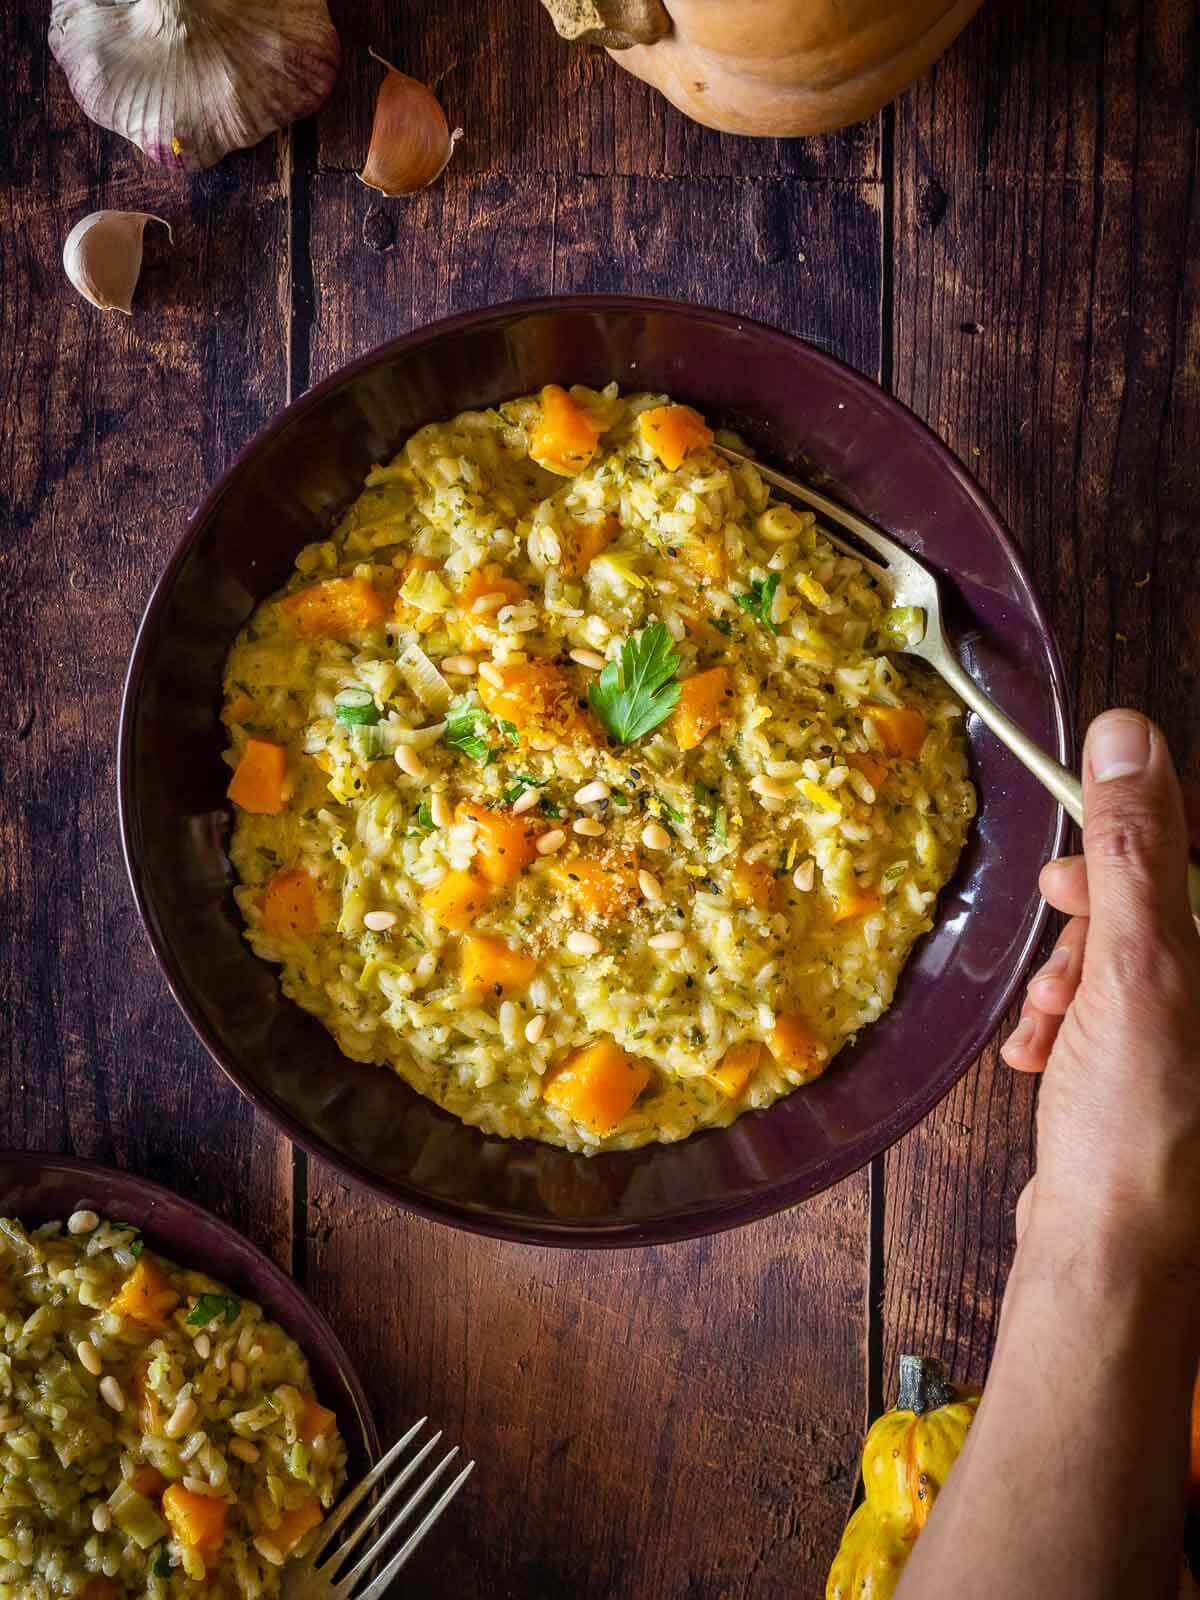 serve the butternut squash risotto with your favorite topping or vegan parmesan cheese.